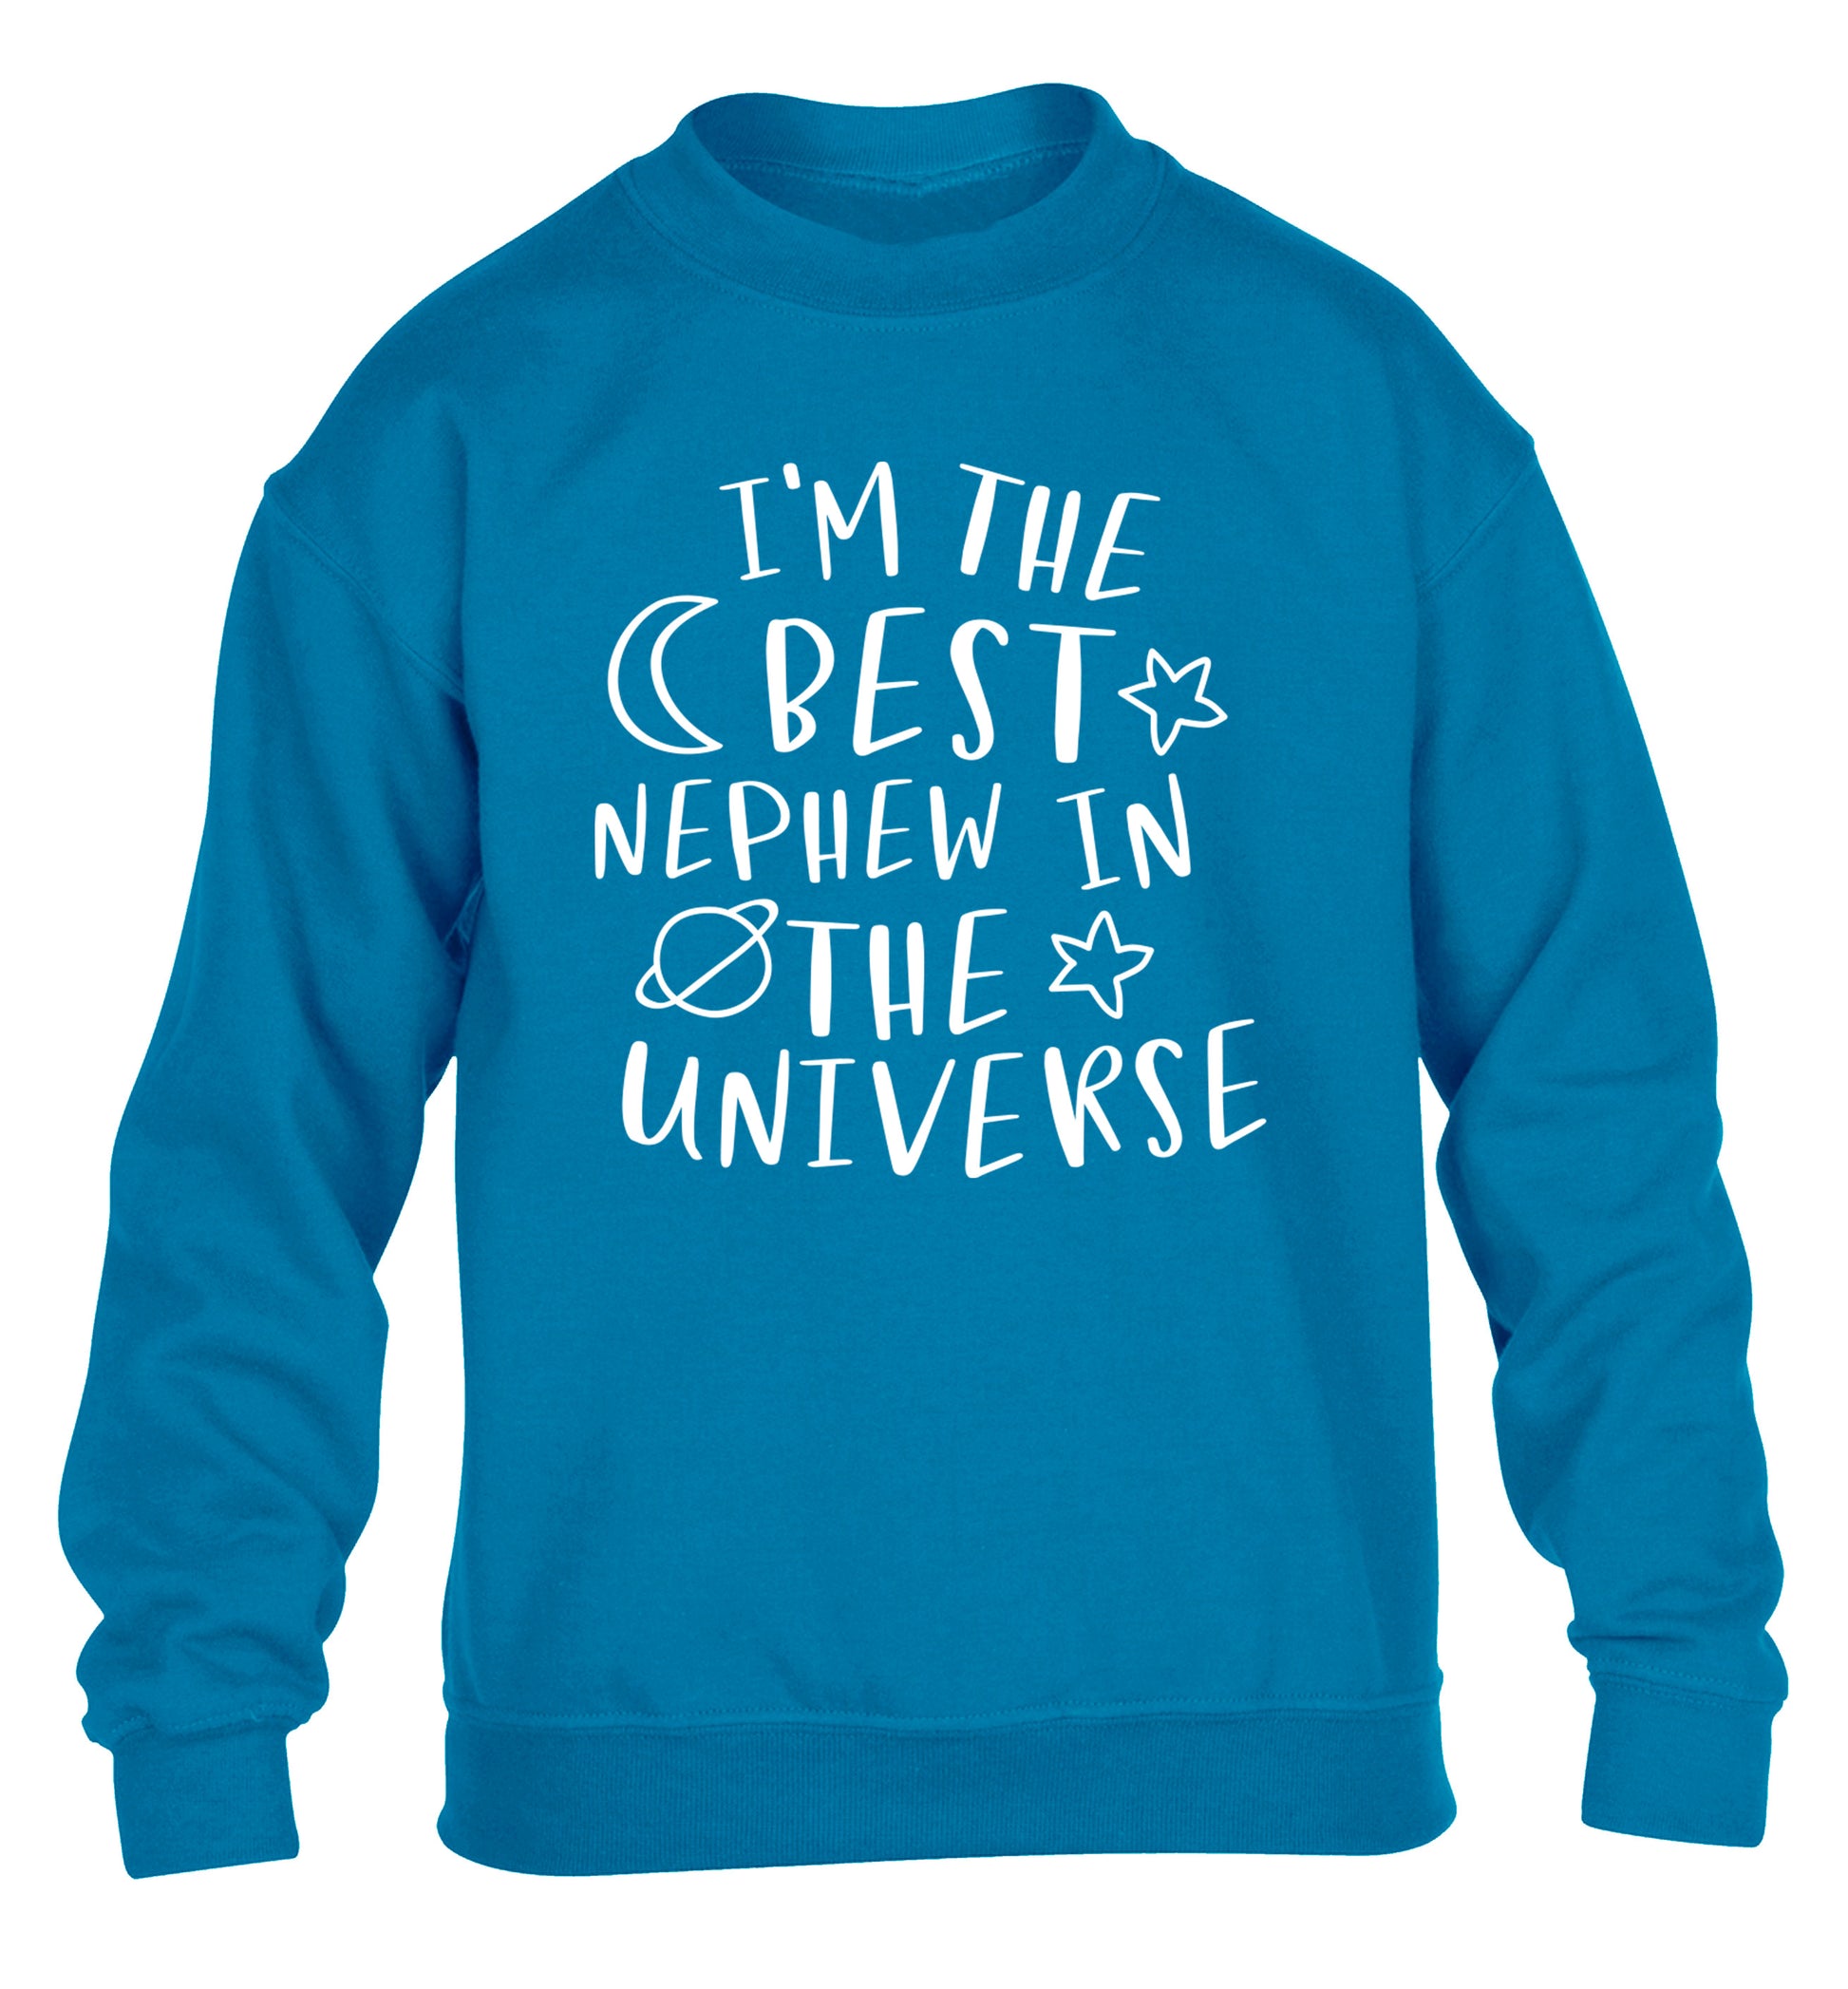 I'm the best nephew in the universe children's blue sweater 12-13 Years